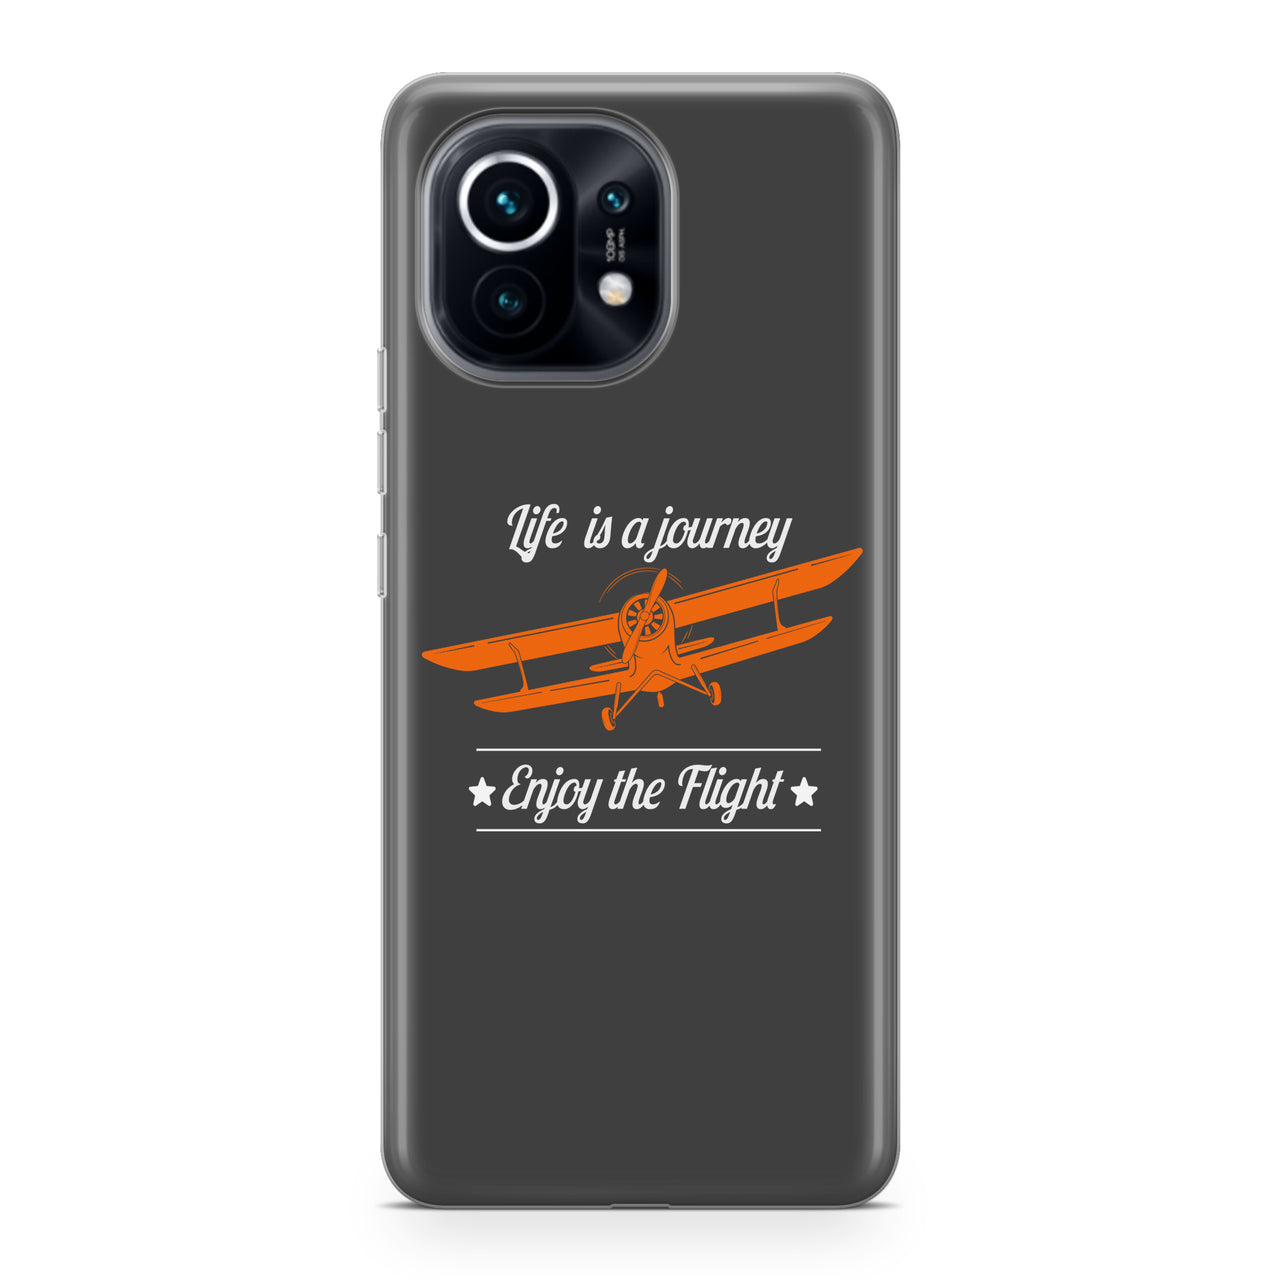 Life is a journey Enjoy the Flight Designed Xiaomi Cases